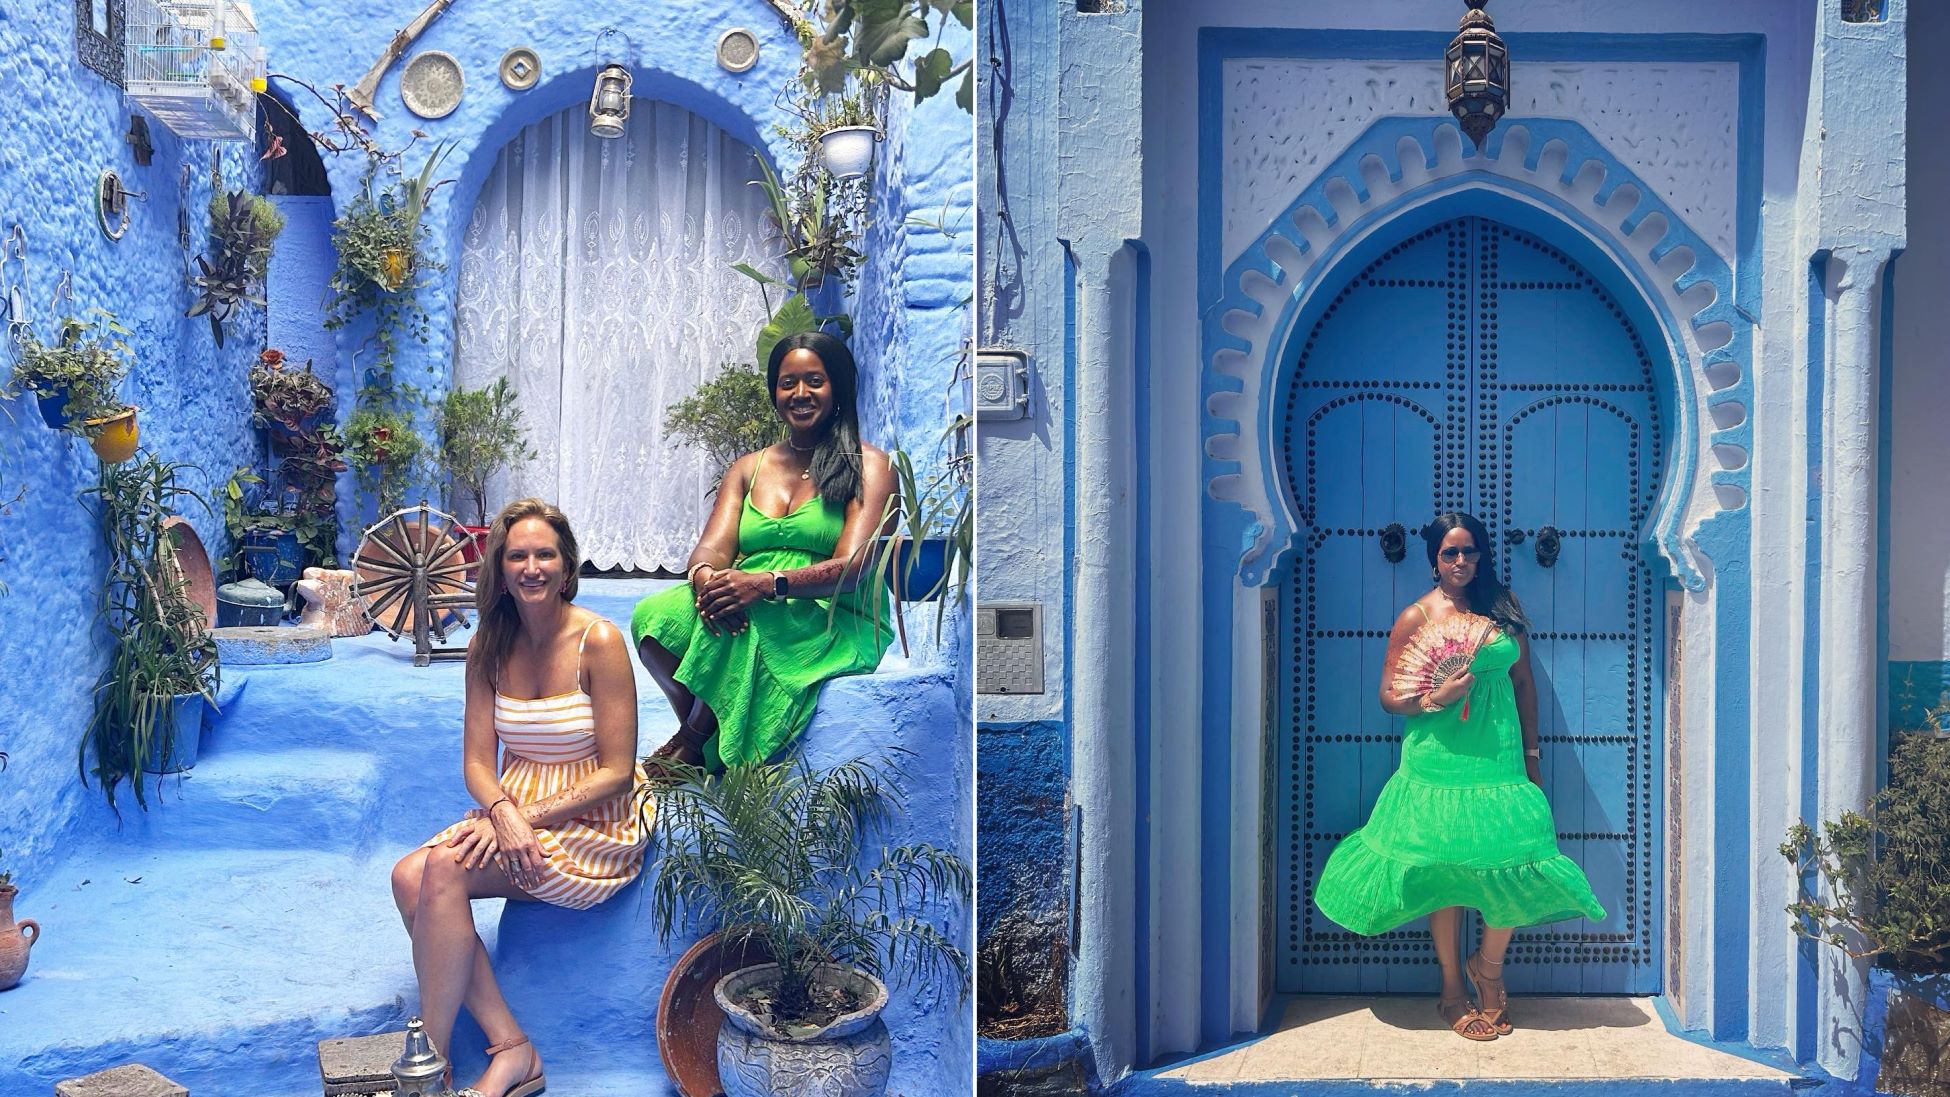 Two images from my Morocco vacation: On the left two women are sitting in an area all covered in blue, and on the right a woman in a green dress is standing in a beautiful blue archway.